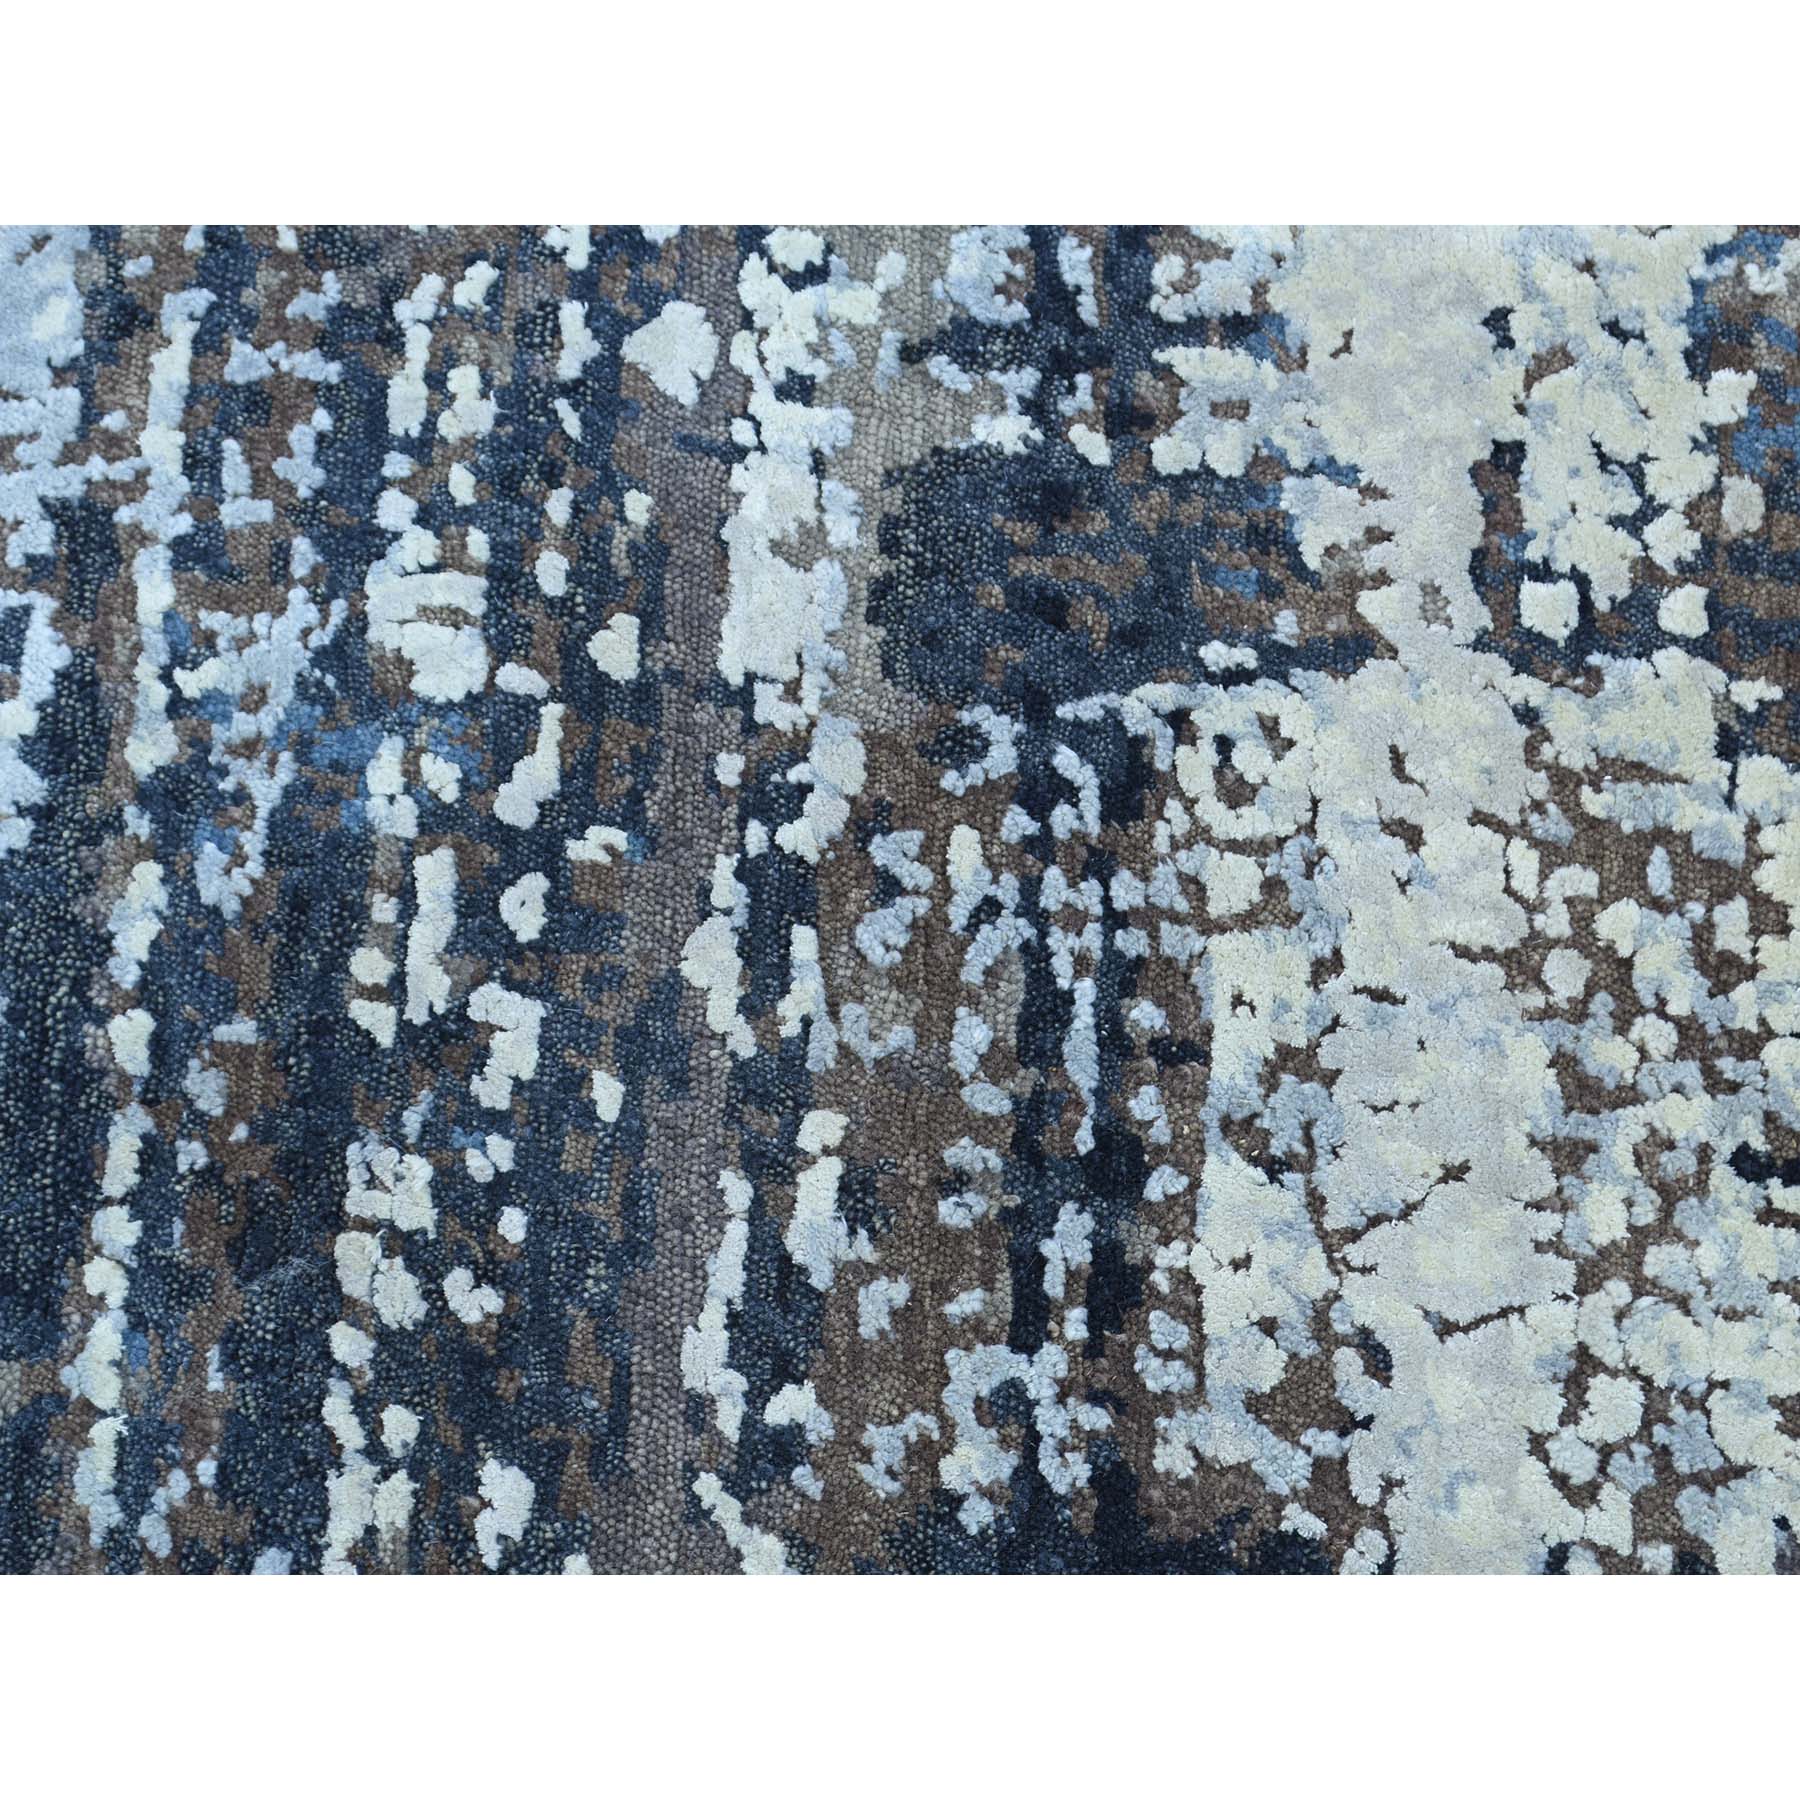 2-x2- Hand-Knotted Wool and Silk Abstract Square Hi and Low Pile Rug 